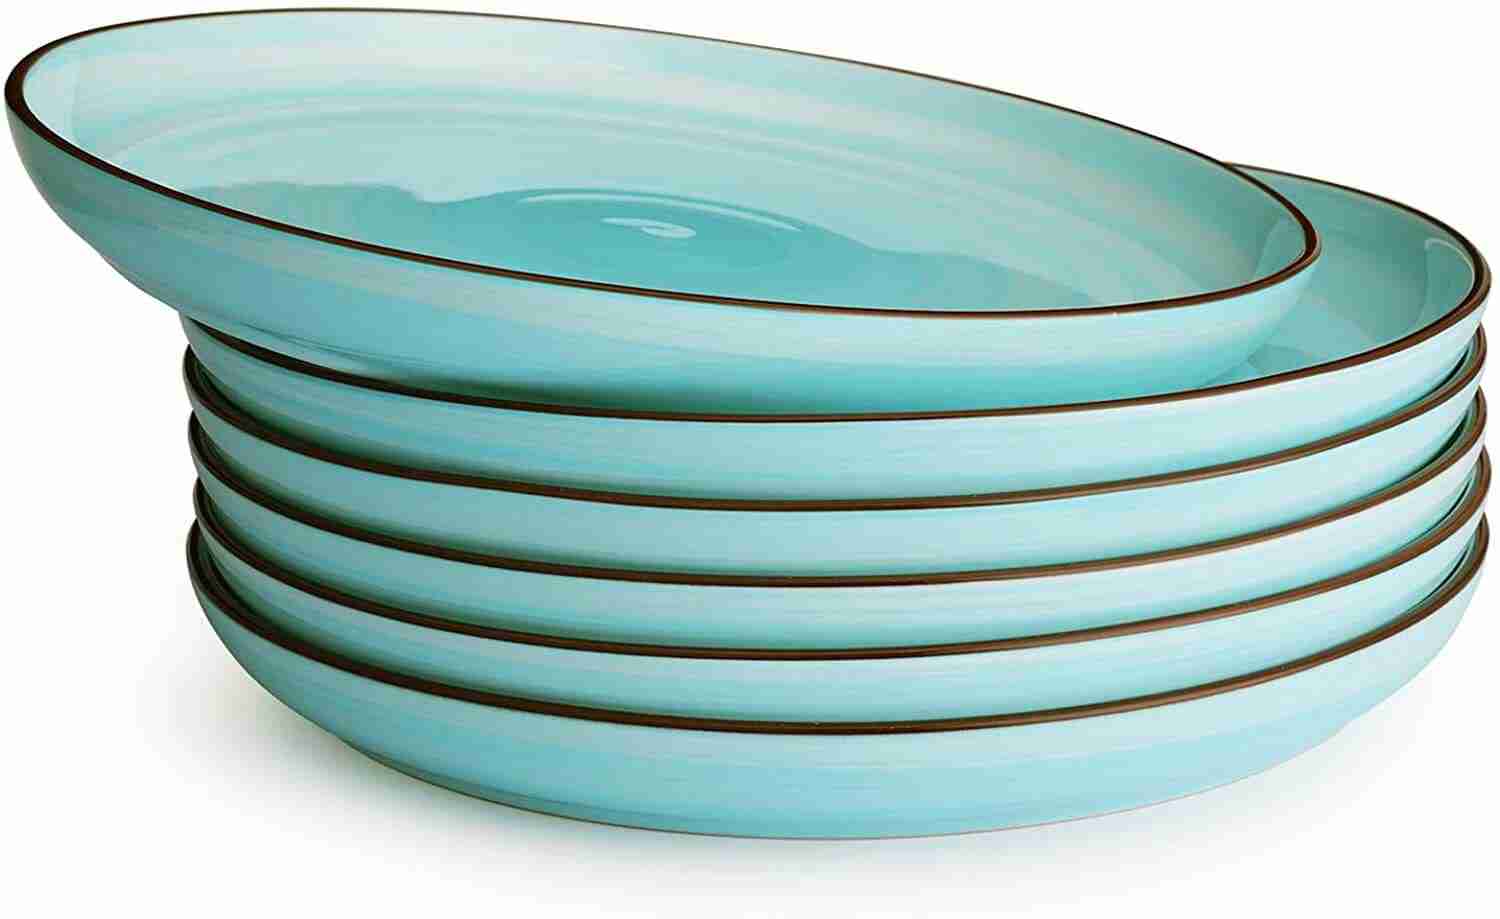 Sweese 164.602 Porcelain can porcelain plates go in the oven